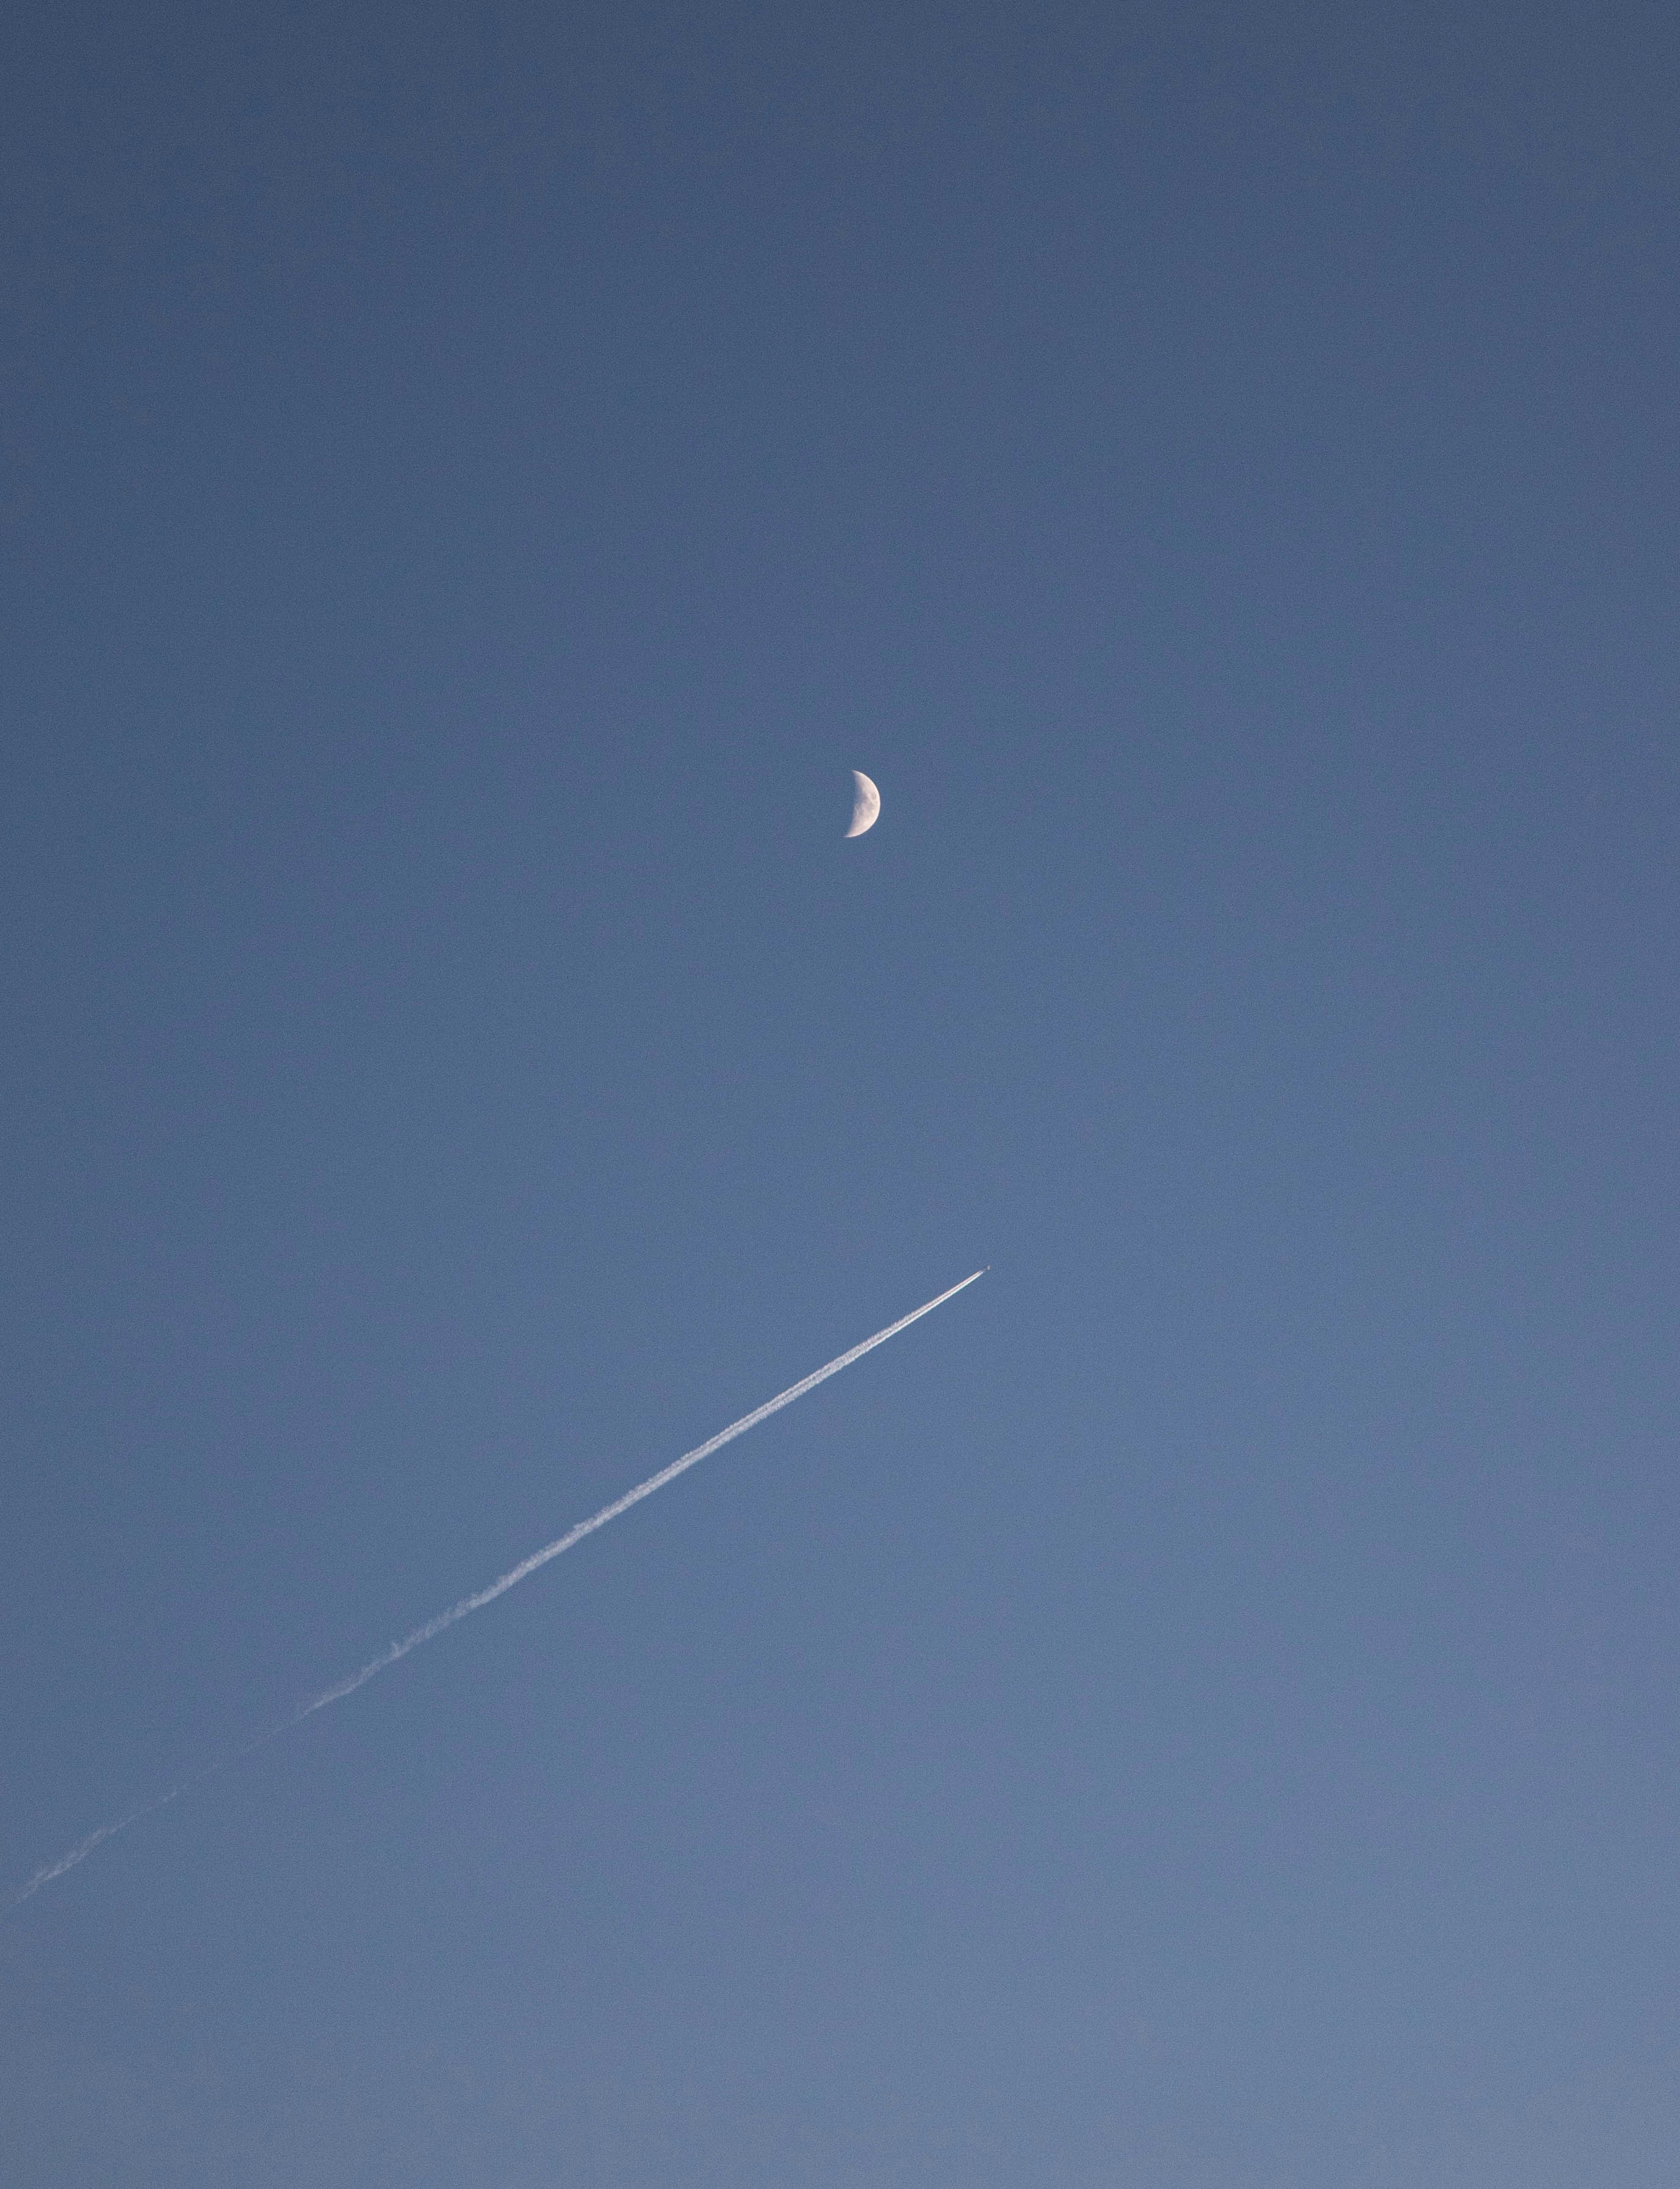 An airplane leaving a diagonal trace just below the moon.